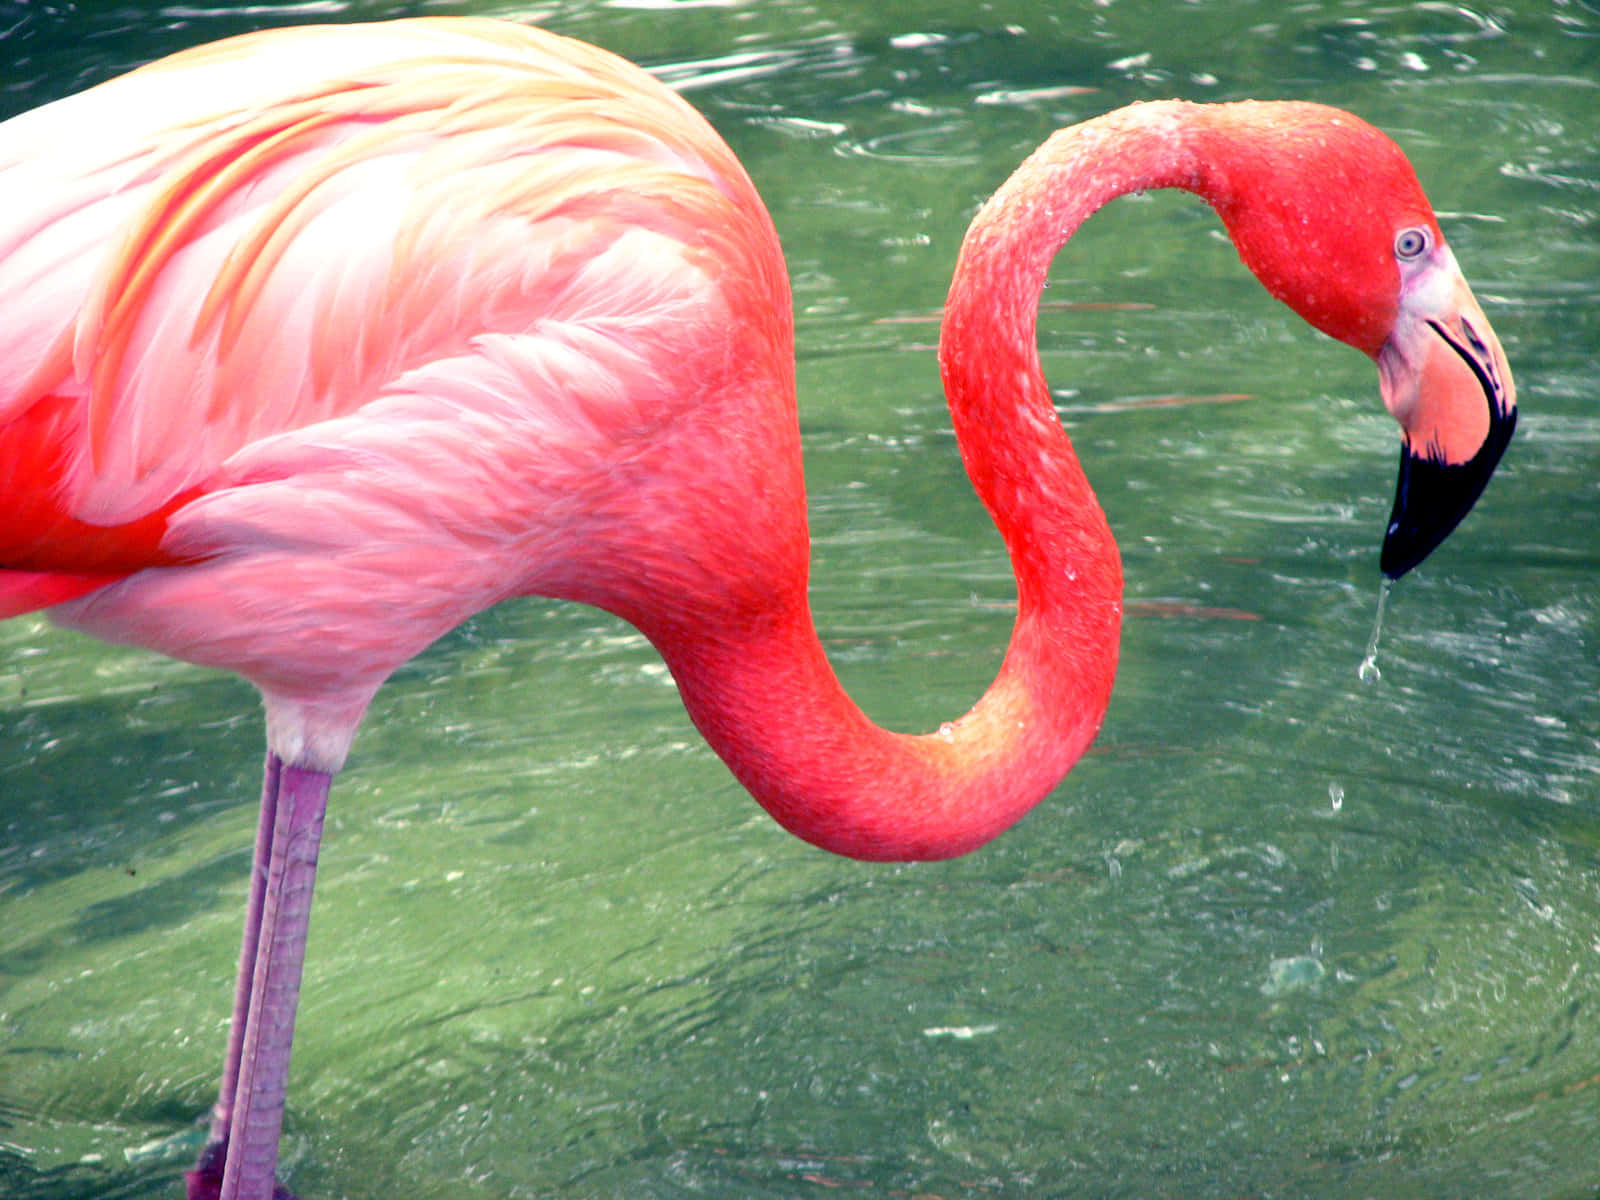 Colorful and exotic, explore the beauty of the flamingo